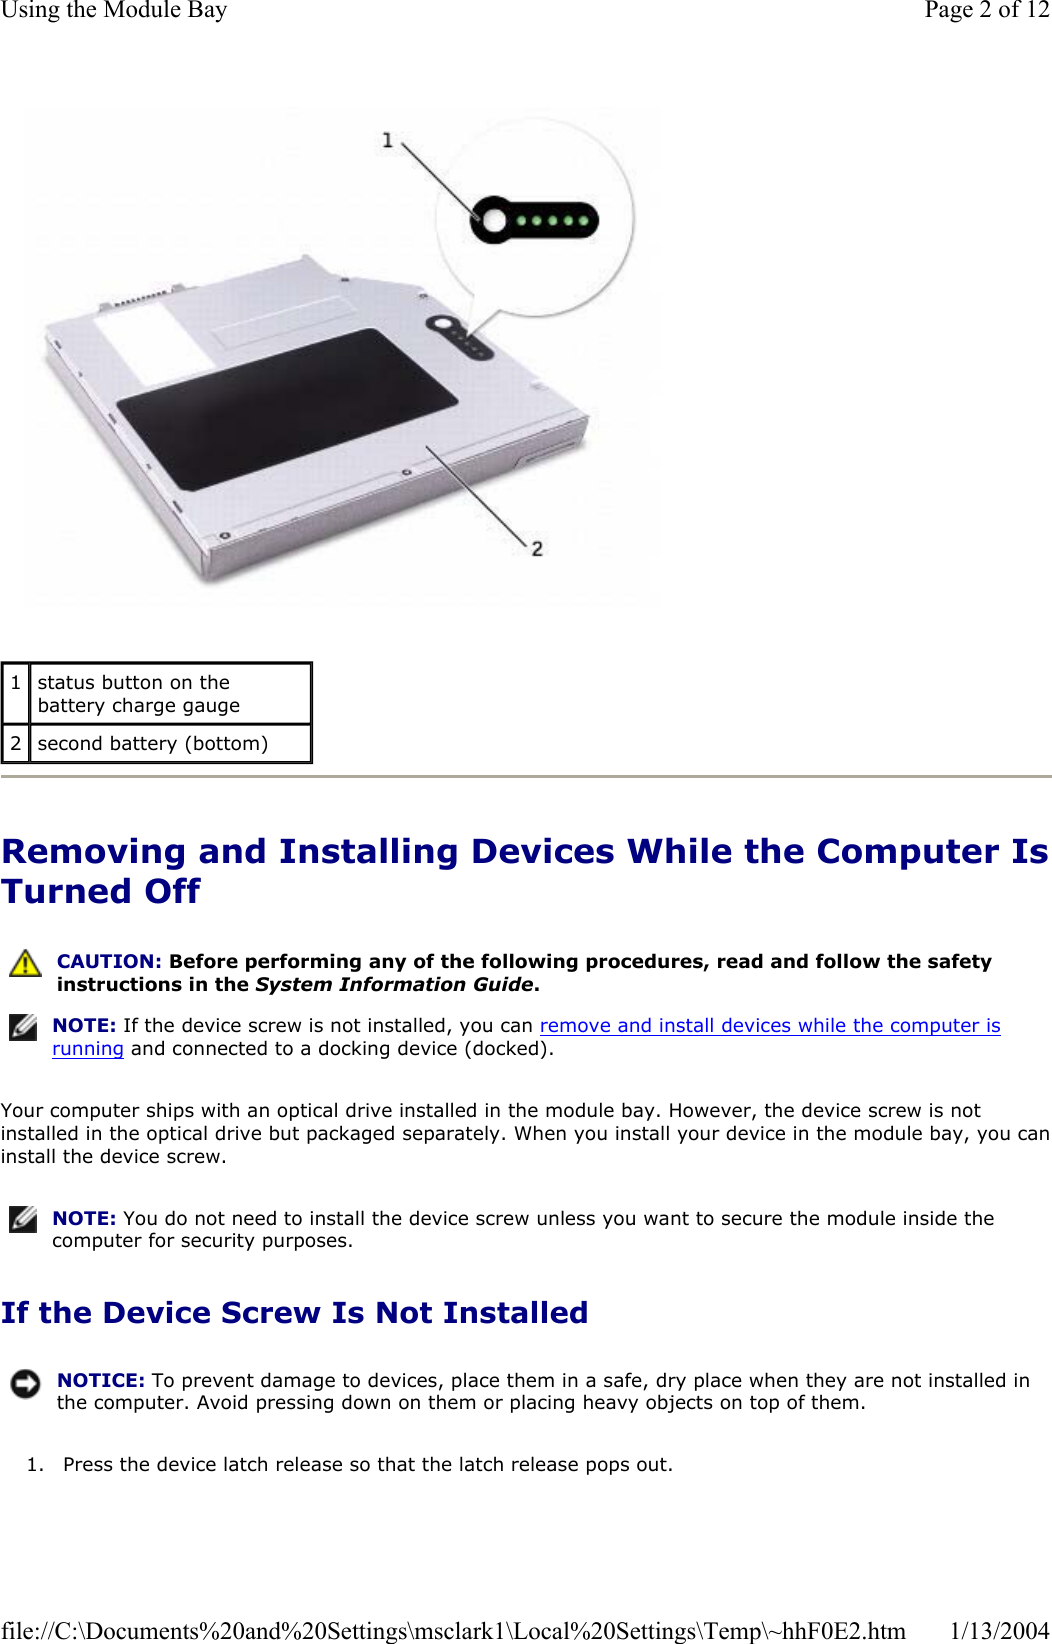 Removing and Installing Devices While the Computer IsTurned Off Your computer ships with an optical drive installed in the module bay. However, the device screw is not installed in the optical drive but packaged separately. When you install your device in the module bay, you caninstall the device screw. If the Device Screw Is Not Installed 1. Press the device latch release so that the latch release pops out. 1status button on the battery charge gauge 2second battery (bottom) CAUTION: Before performing any of the following procedures, read and follow the safety instructions in the System Information Guide.NOTE: If the device screw is not installed, you can remove and install devices while the computer is running and connected to a docking device (docked).NOTE: You do not need to install the device screw unless you want to secure the module inside the computer for security purposes.NOTICE: To prevent damage to devices, place them in a safe, dry place when they are not installed in the computer. Avoid pressing down on them or placing heavy objects on top of them.Page 2 of 12Using the Module Bay1/13/2004file://C:\Documents%20and%20Settings\msclark1\Local%20Settings\Temp\~hhF0E2.htm